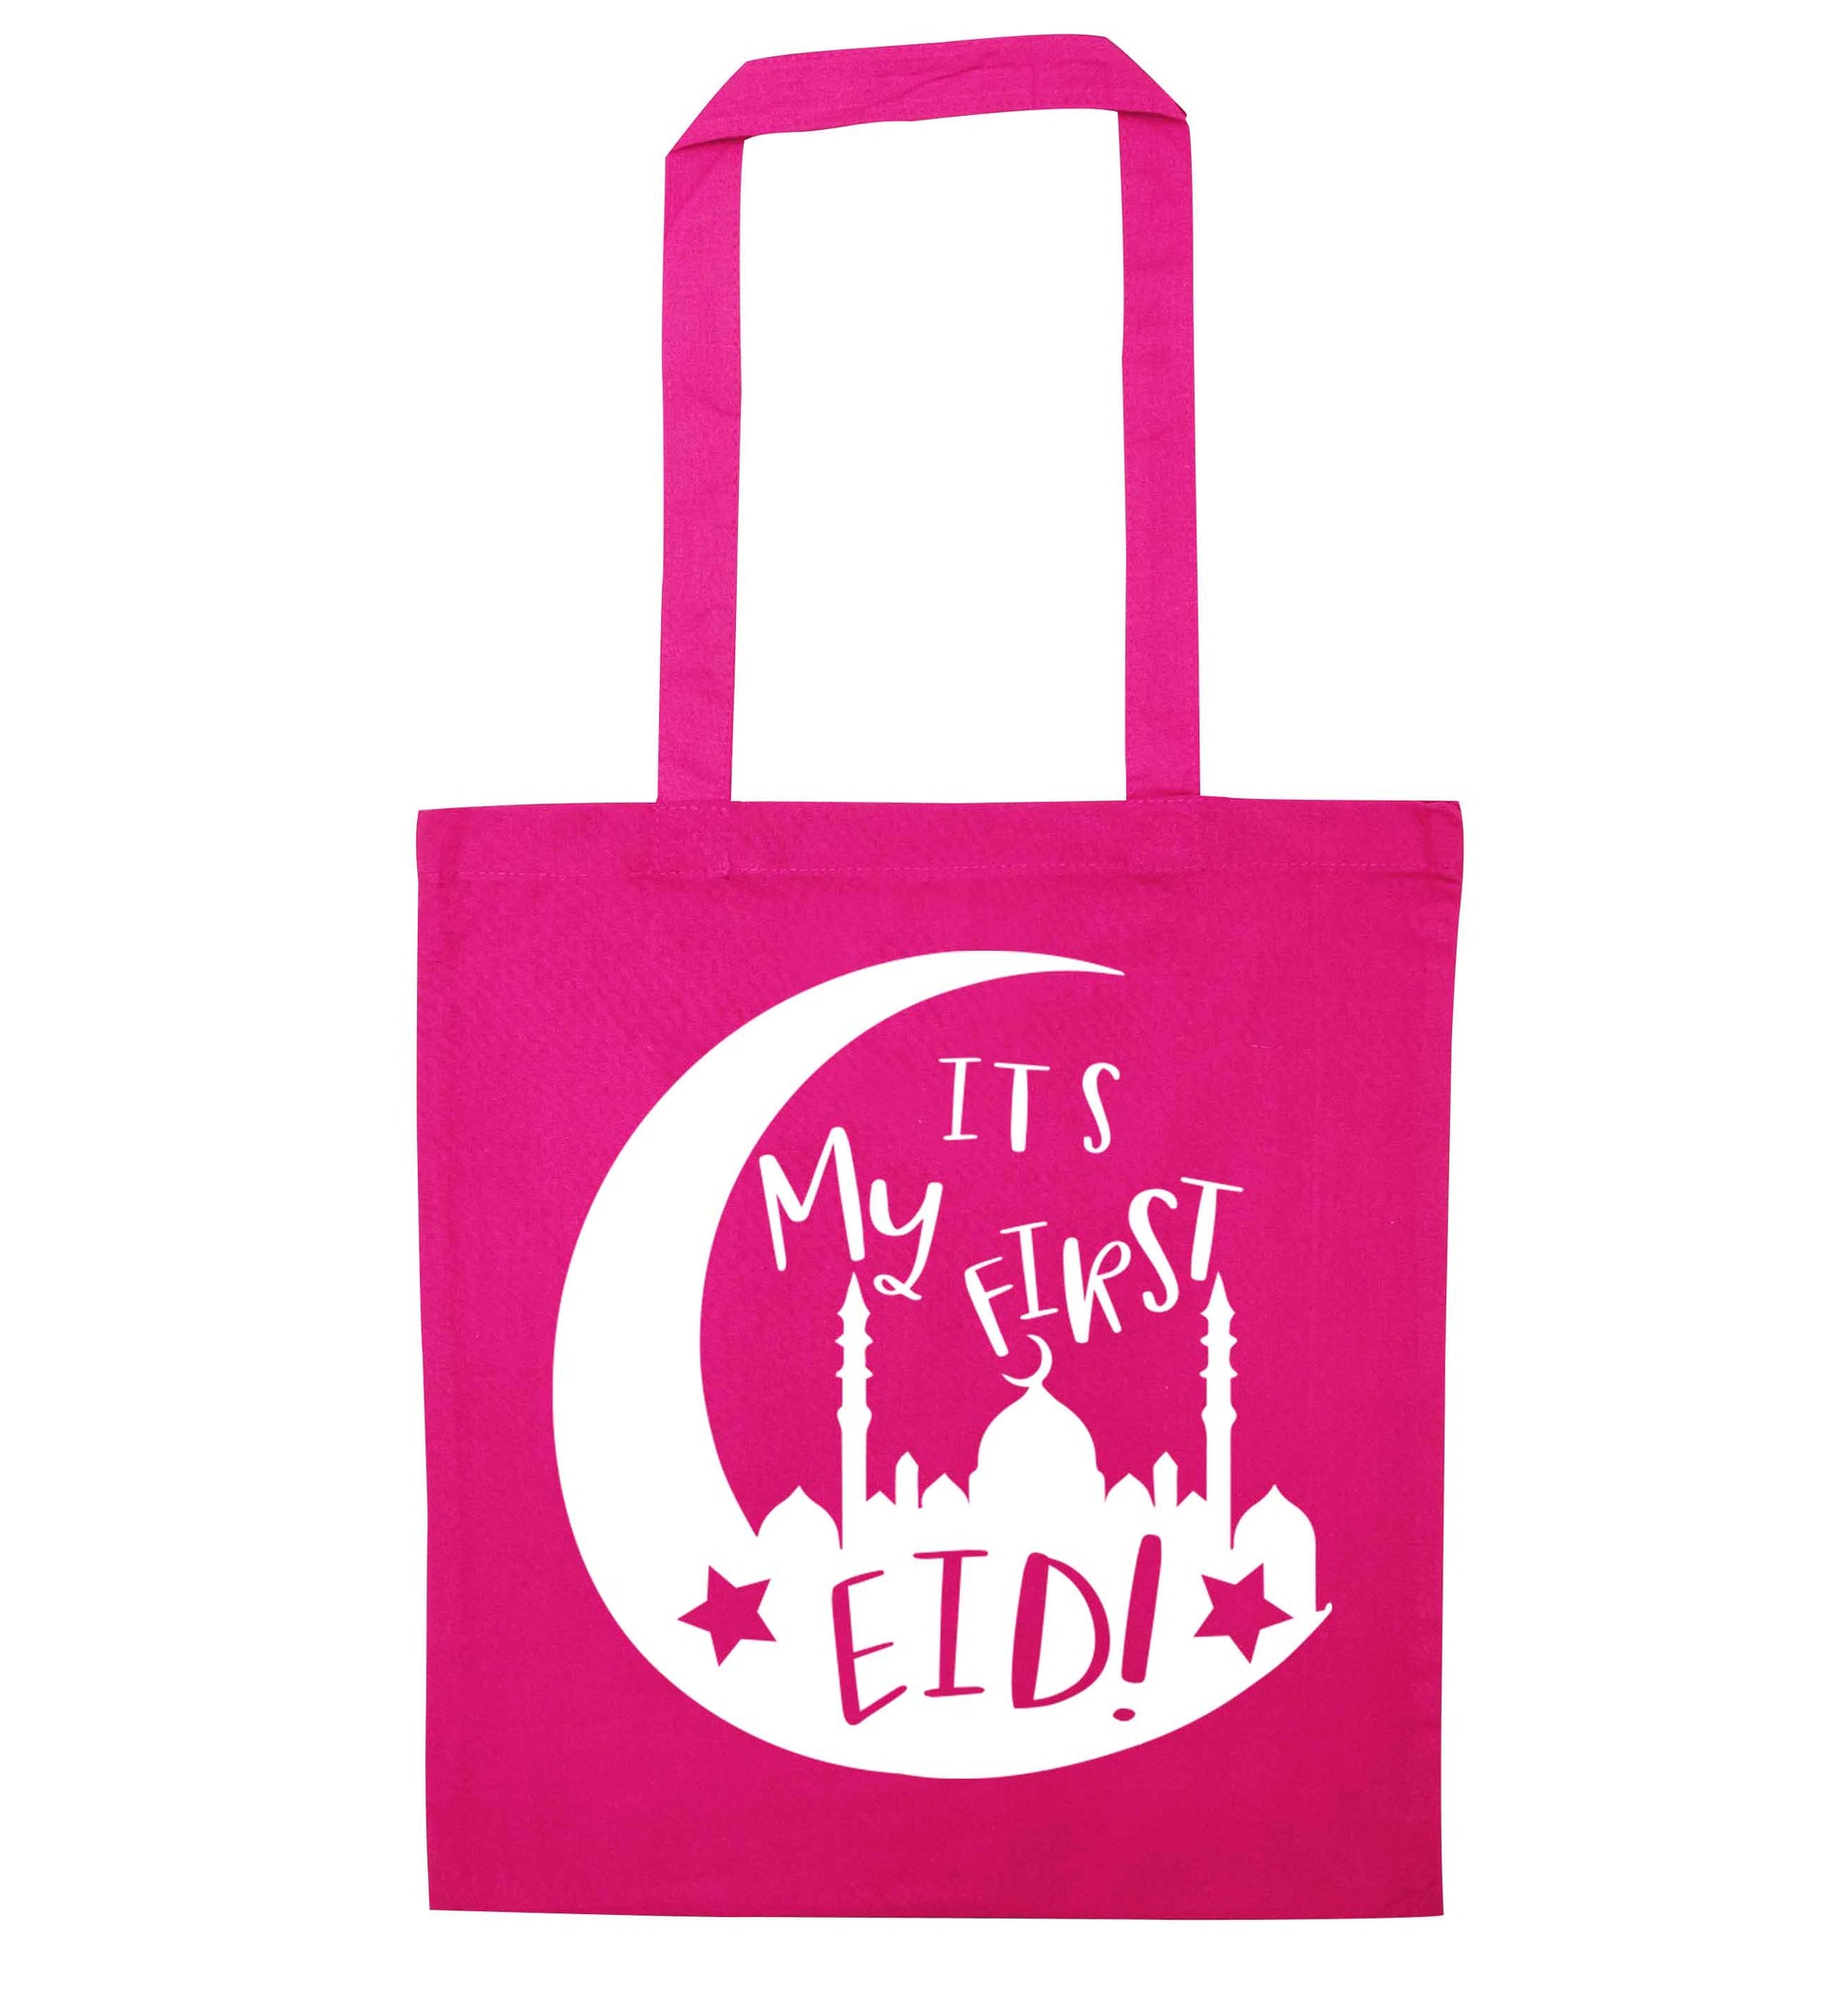 It's my first Eid moon pink tote bag